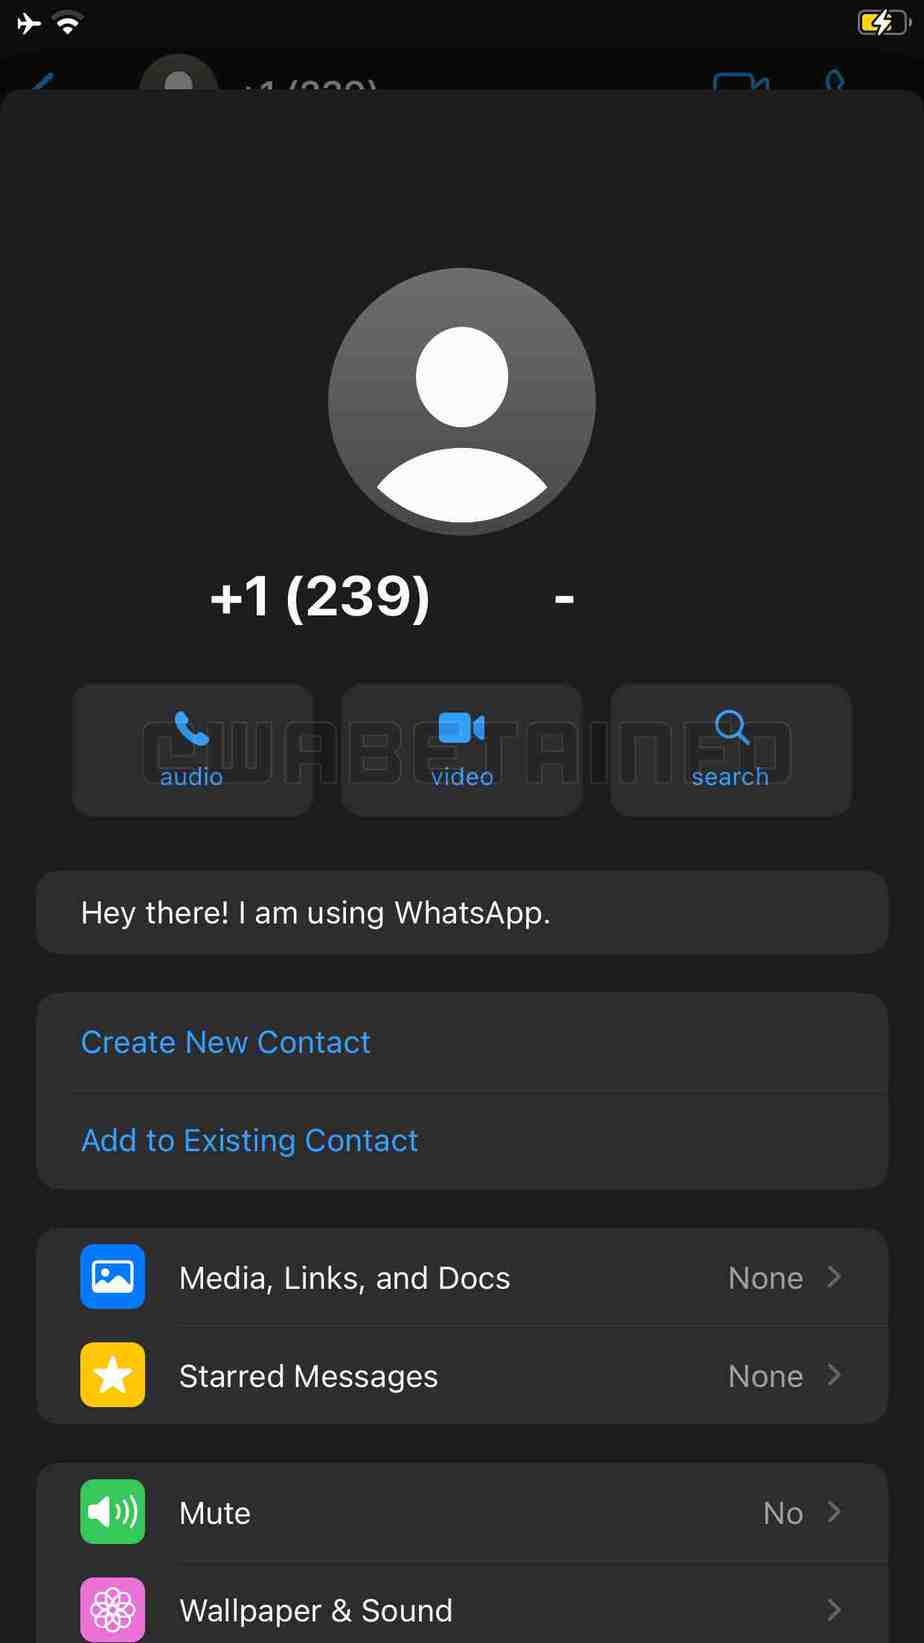 WhatsApp new UI for Contact Info, Image Credit: WABetaInfo